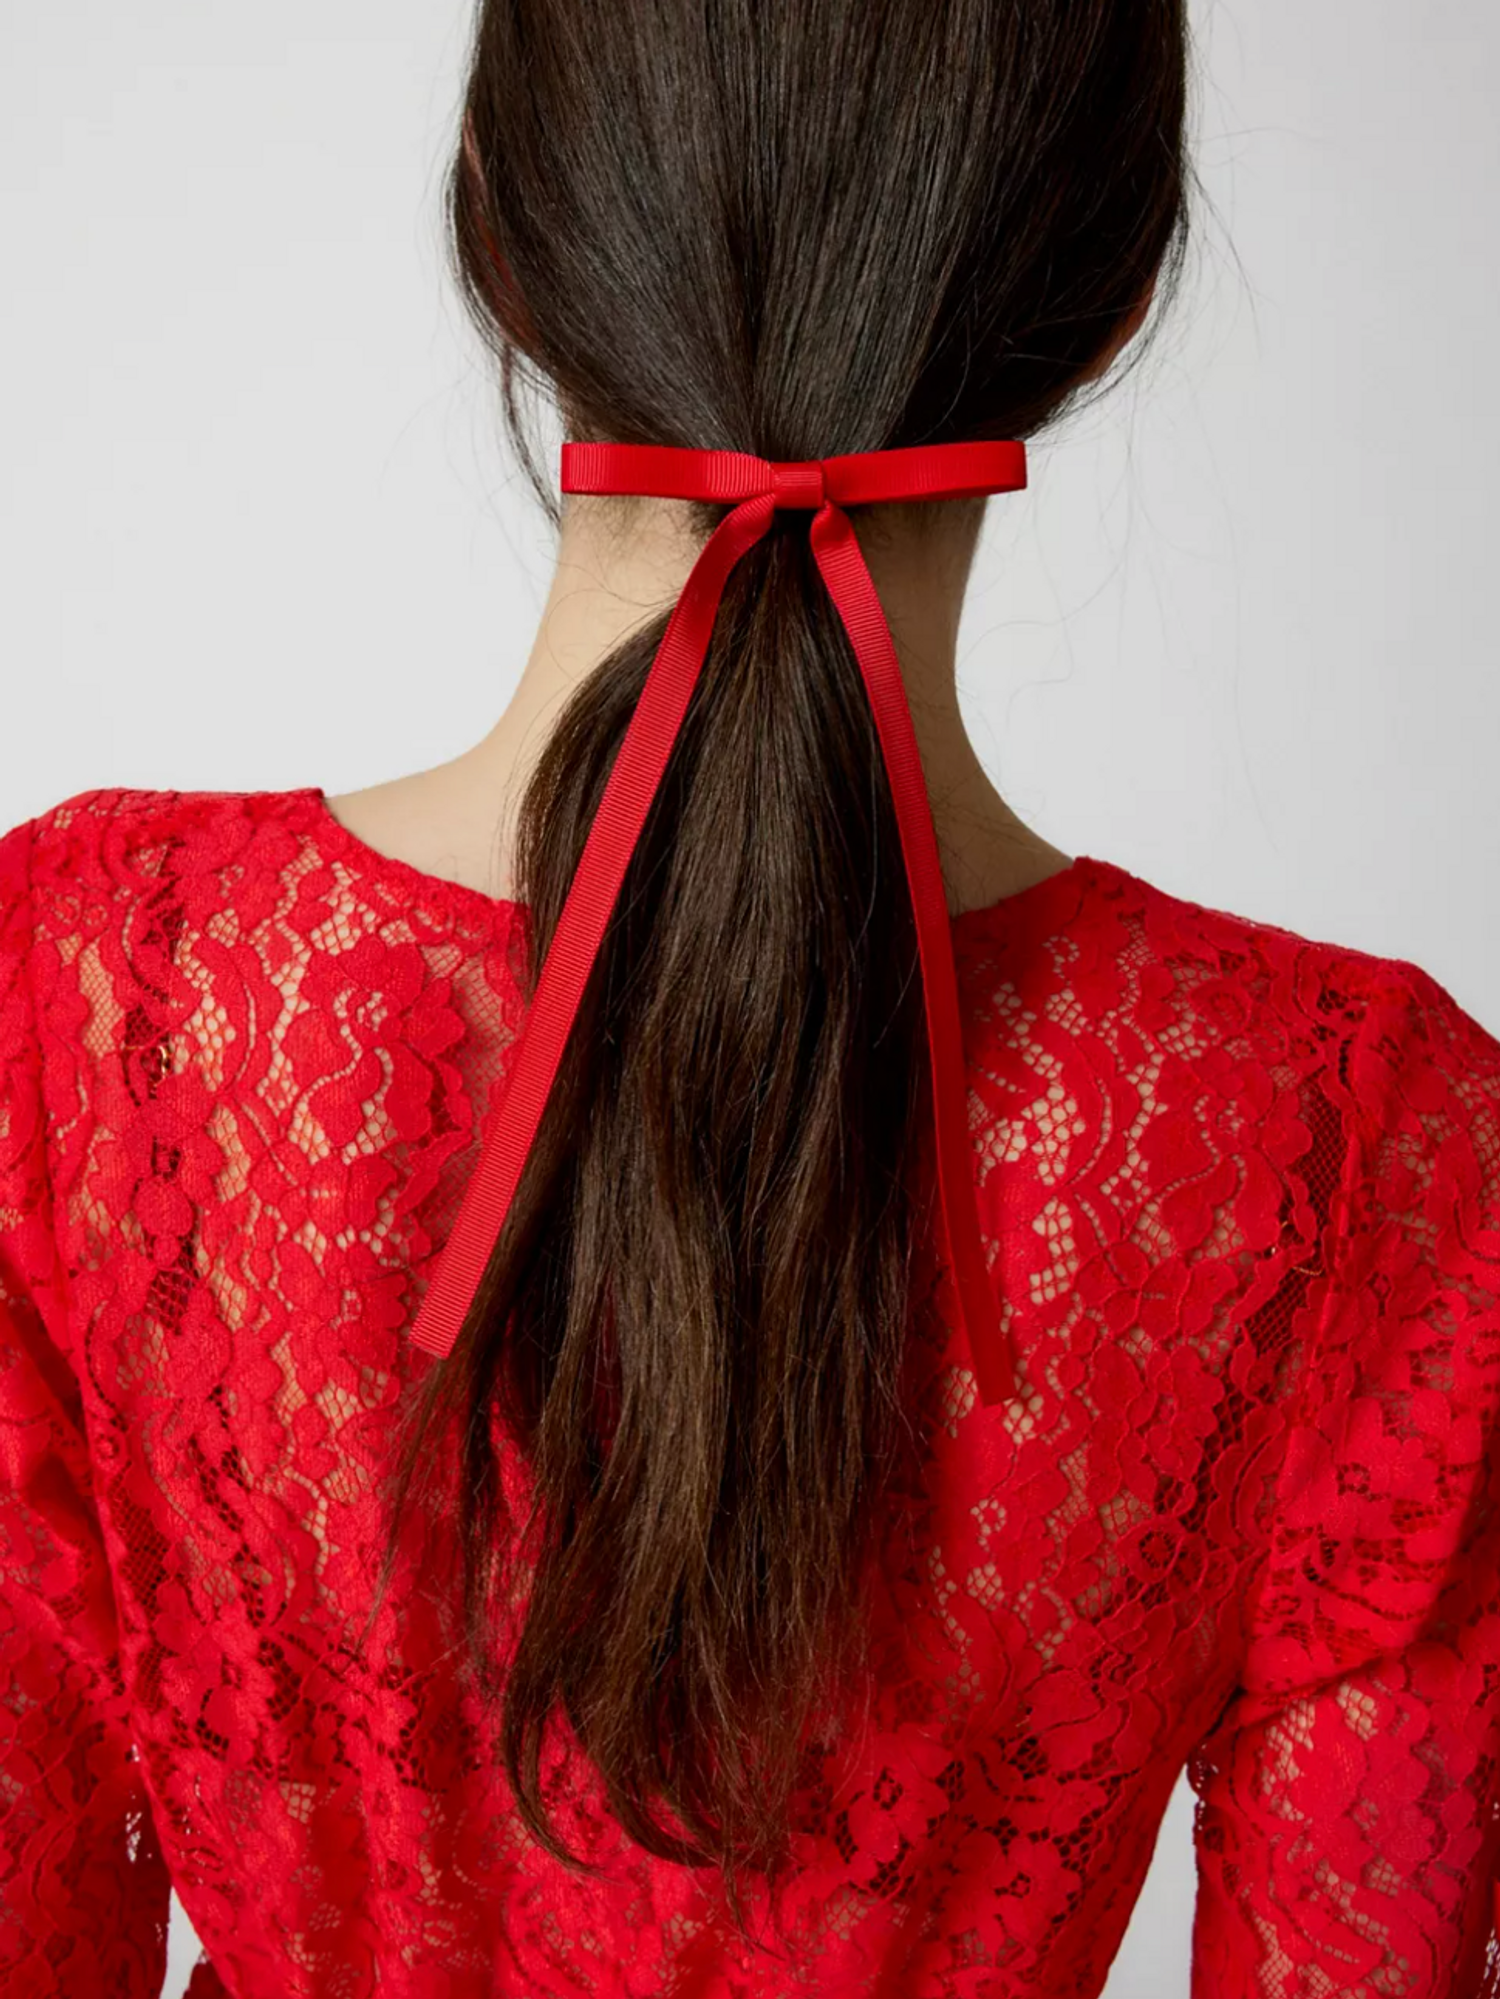 Urban Outfitters Ribbon Hair Bow Barrette Set